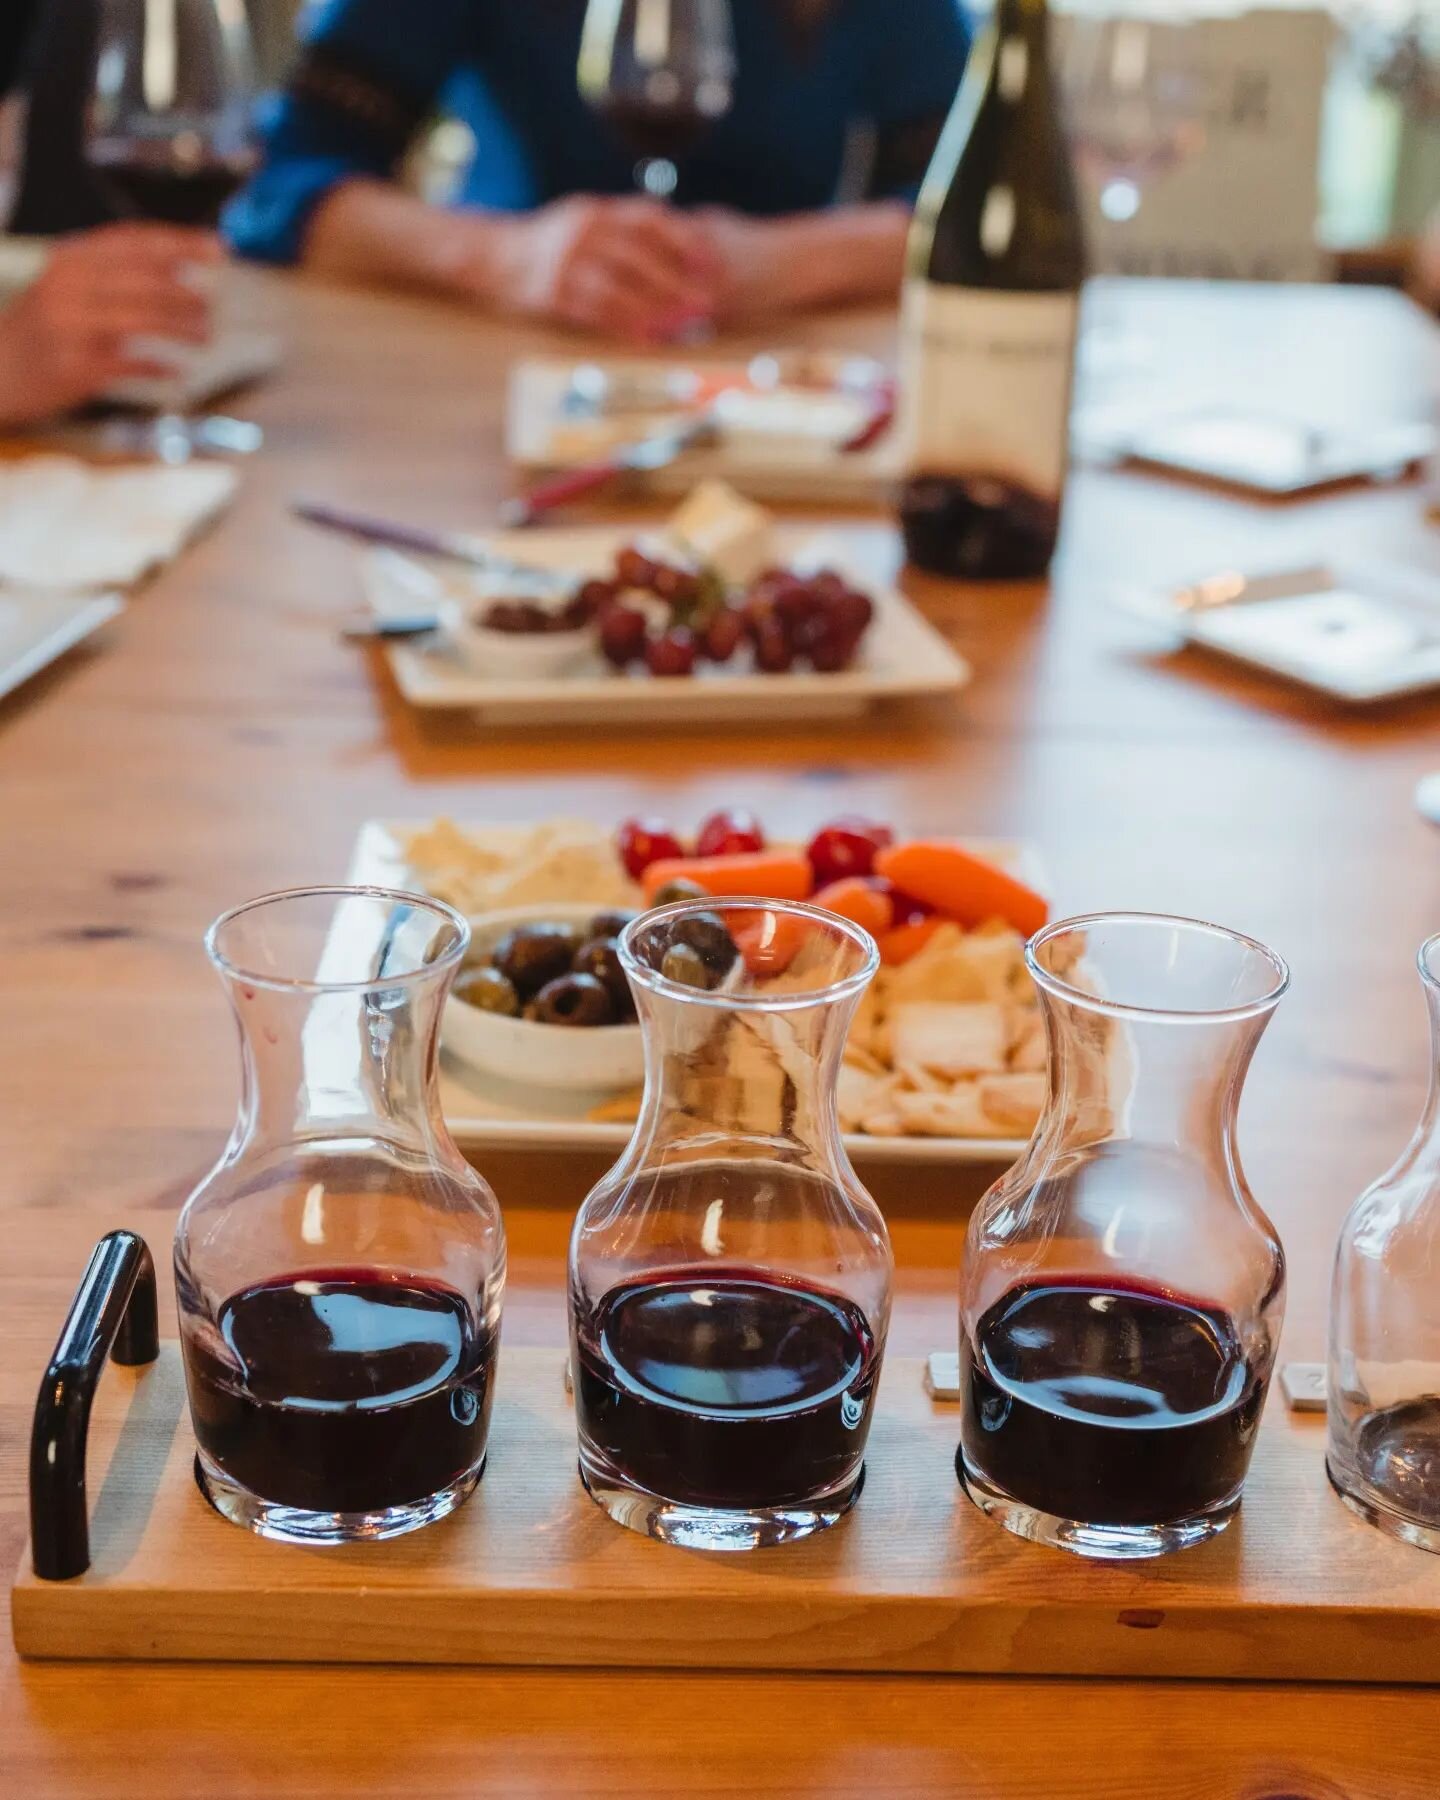 Enjoy a flight and food with friends! 

And don't forget tomorrow is First Friday: live music from 6-8pm, food by Class Cooking 5-7pm, new art and wine!

Link in bio to make reservation 🥂